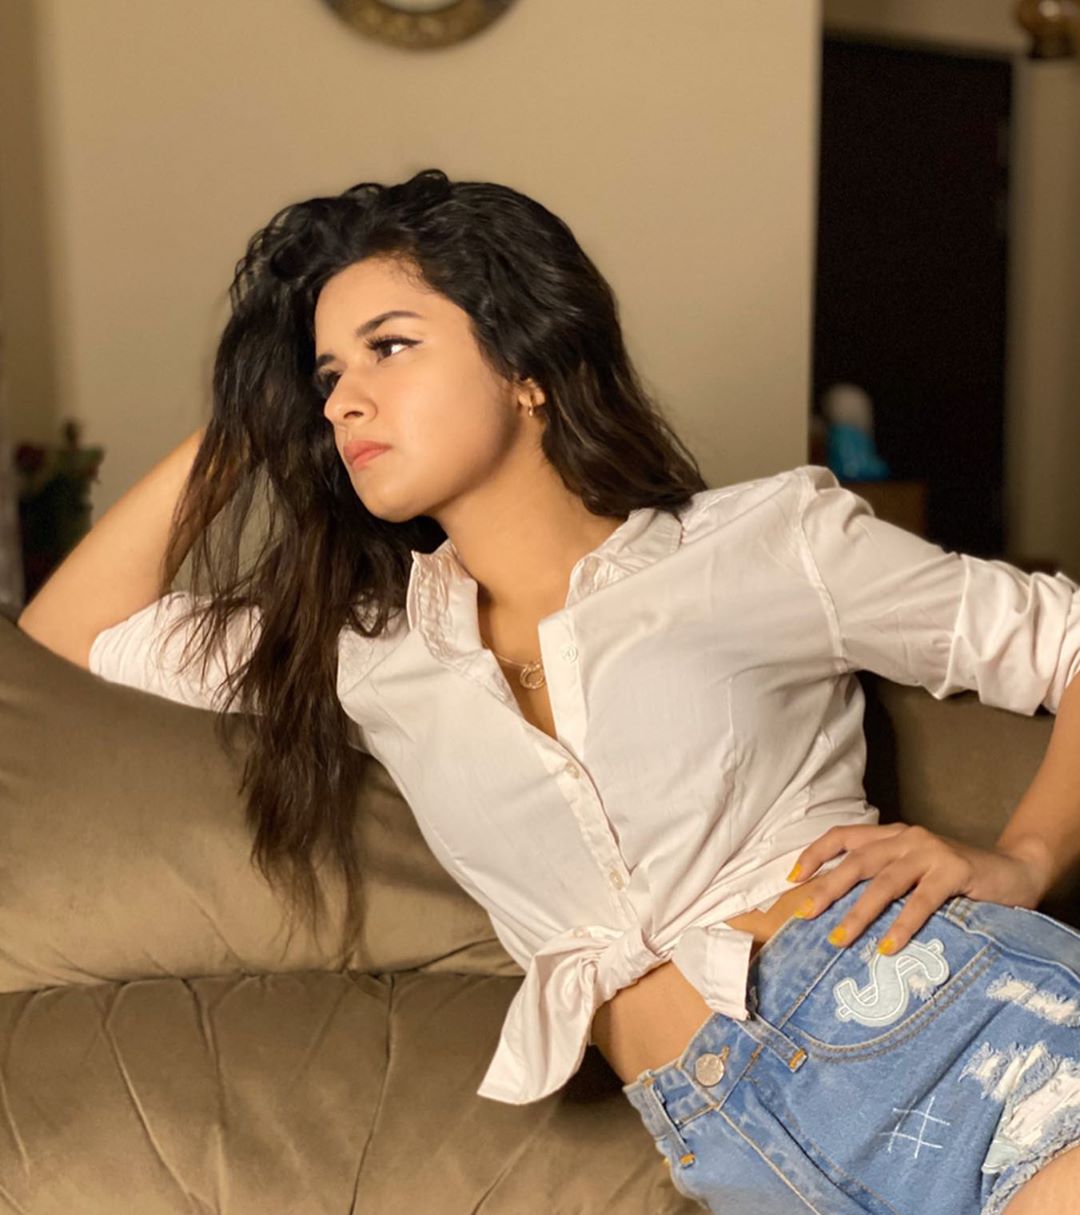 Avneet Kaur Wallpapers, Photos, Images &Amp; Pictures I Love You Like A Love Song Baby.
Select You Fav Pic And Comment Which One You Like!